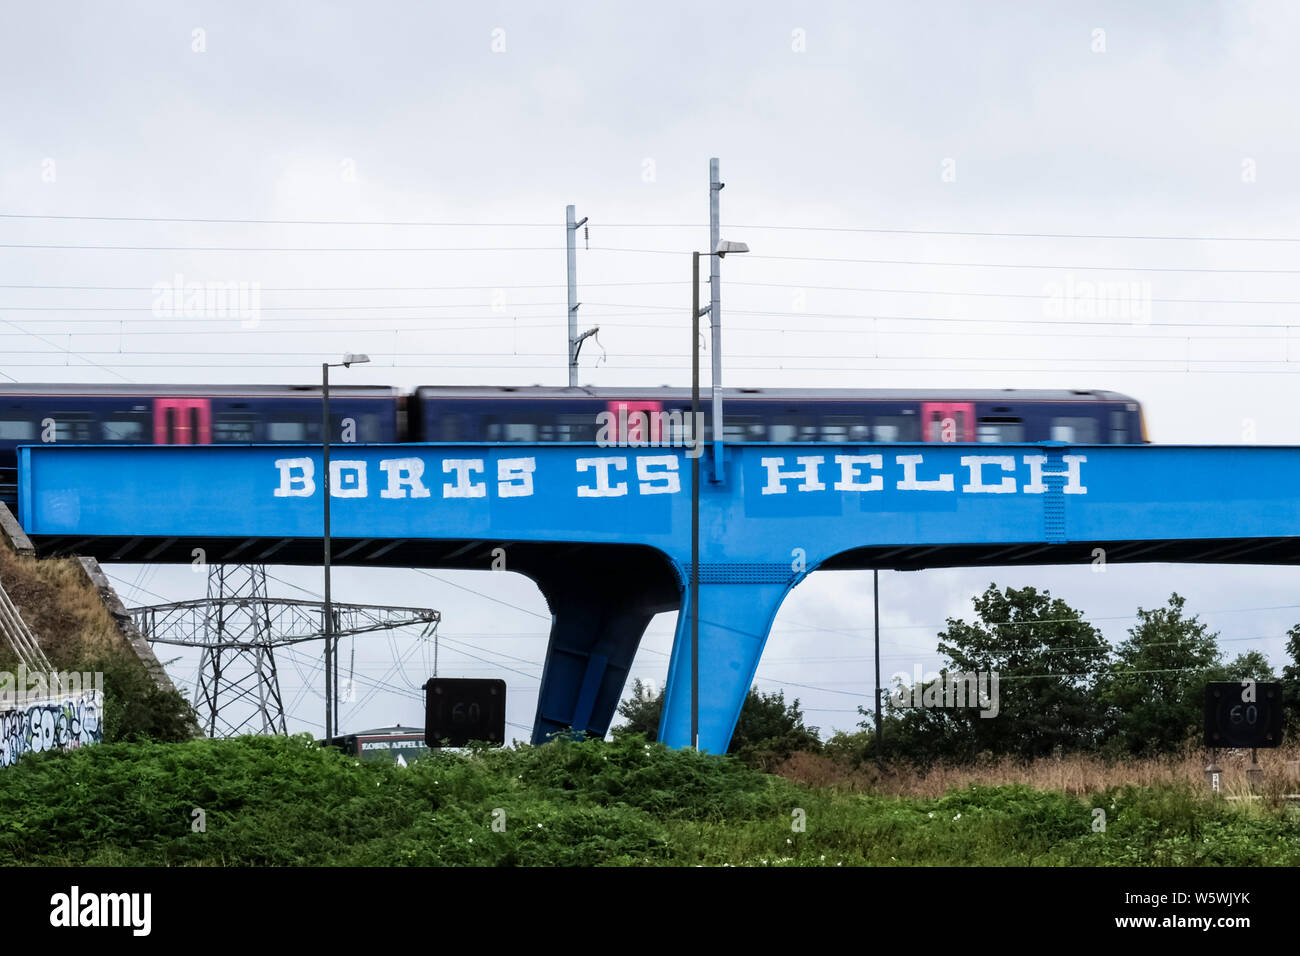 Bristol, UK, 30th July 2019. Work took place last week to overpaint negative Boris graffiti on the Railway bridge over the M4 between junctions 19 and 20 westbound. It was completed ahead of Boris Johnson becoming UK Prime Minister. Fresh graffiti has now been painted. A local resident confirmed it was only a 'day or so old'. Credit: Mr Standfast / Alamy Live News (Helch may refer to a graffiti artist) Stock Photo